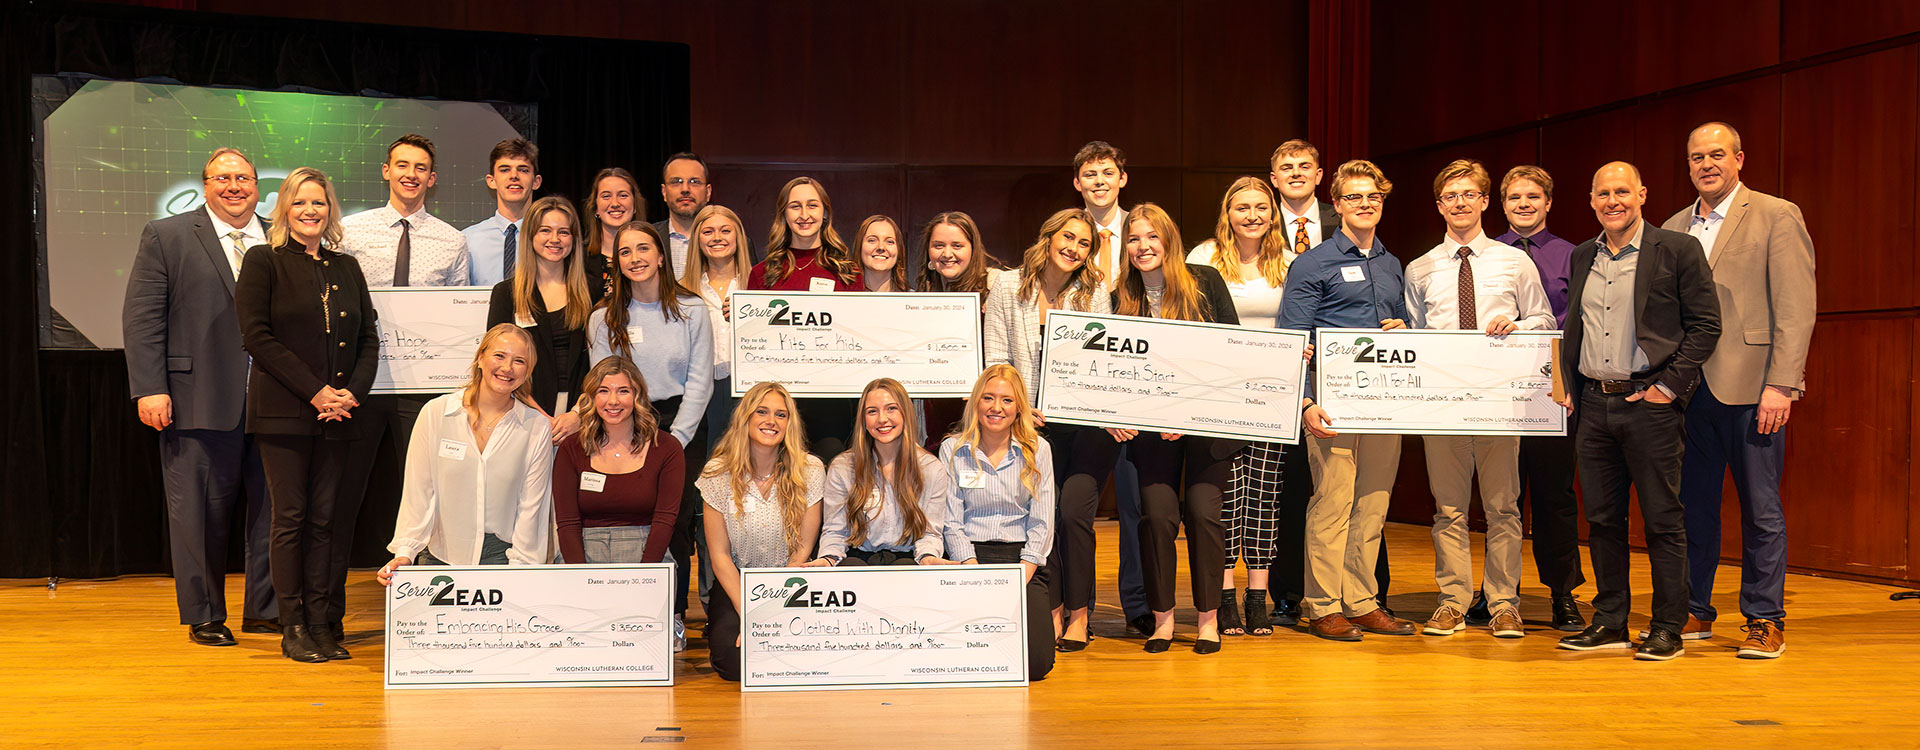 Serve2Lead winners on Schwan Concert Hall stage with big check